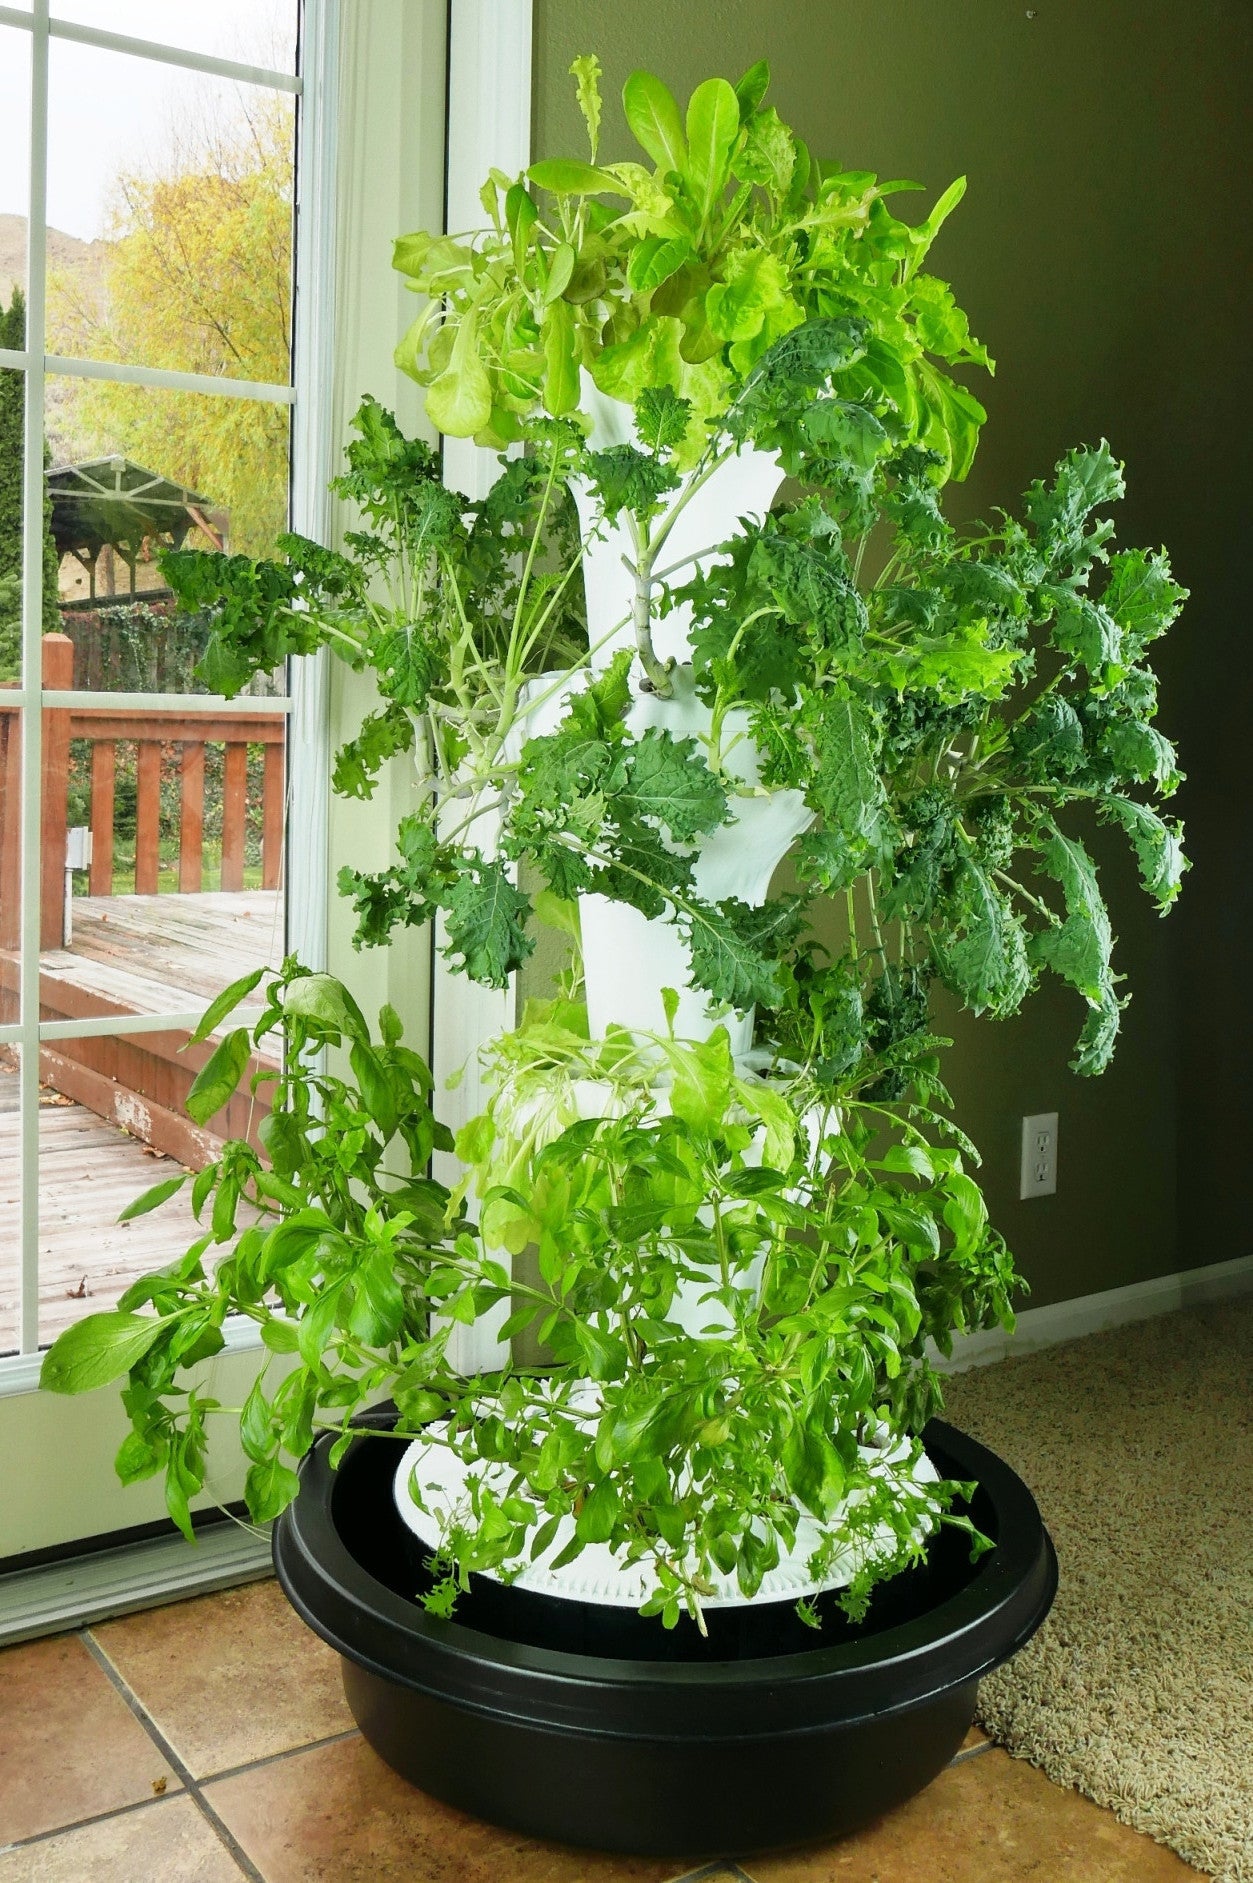 12 Hydroponic System | Vertical